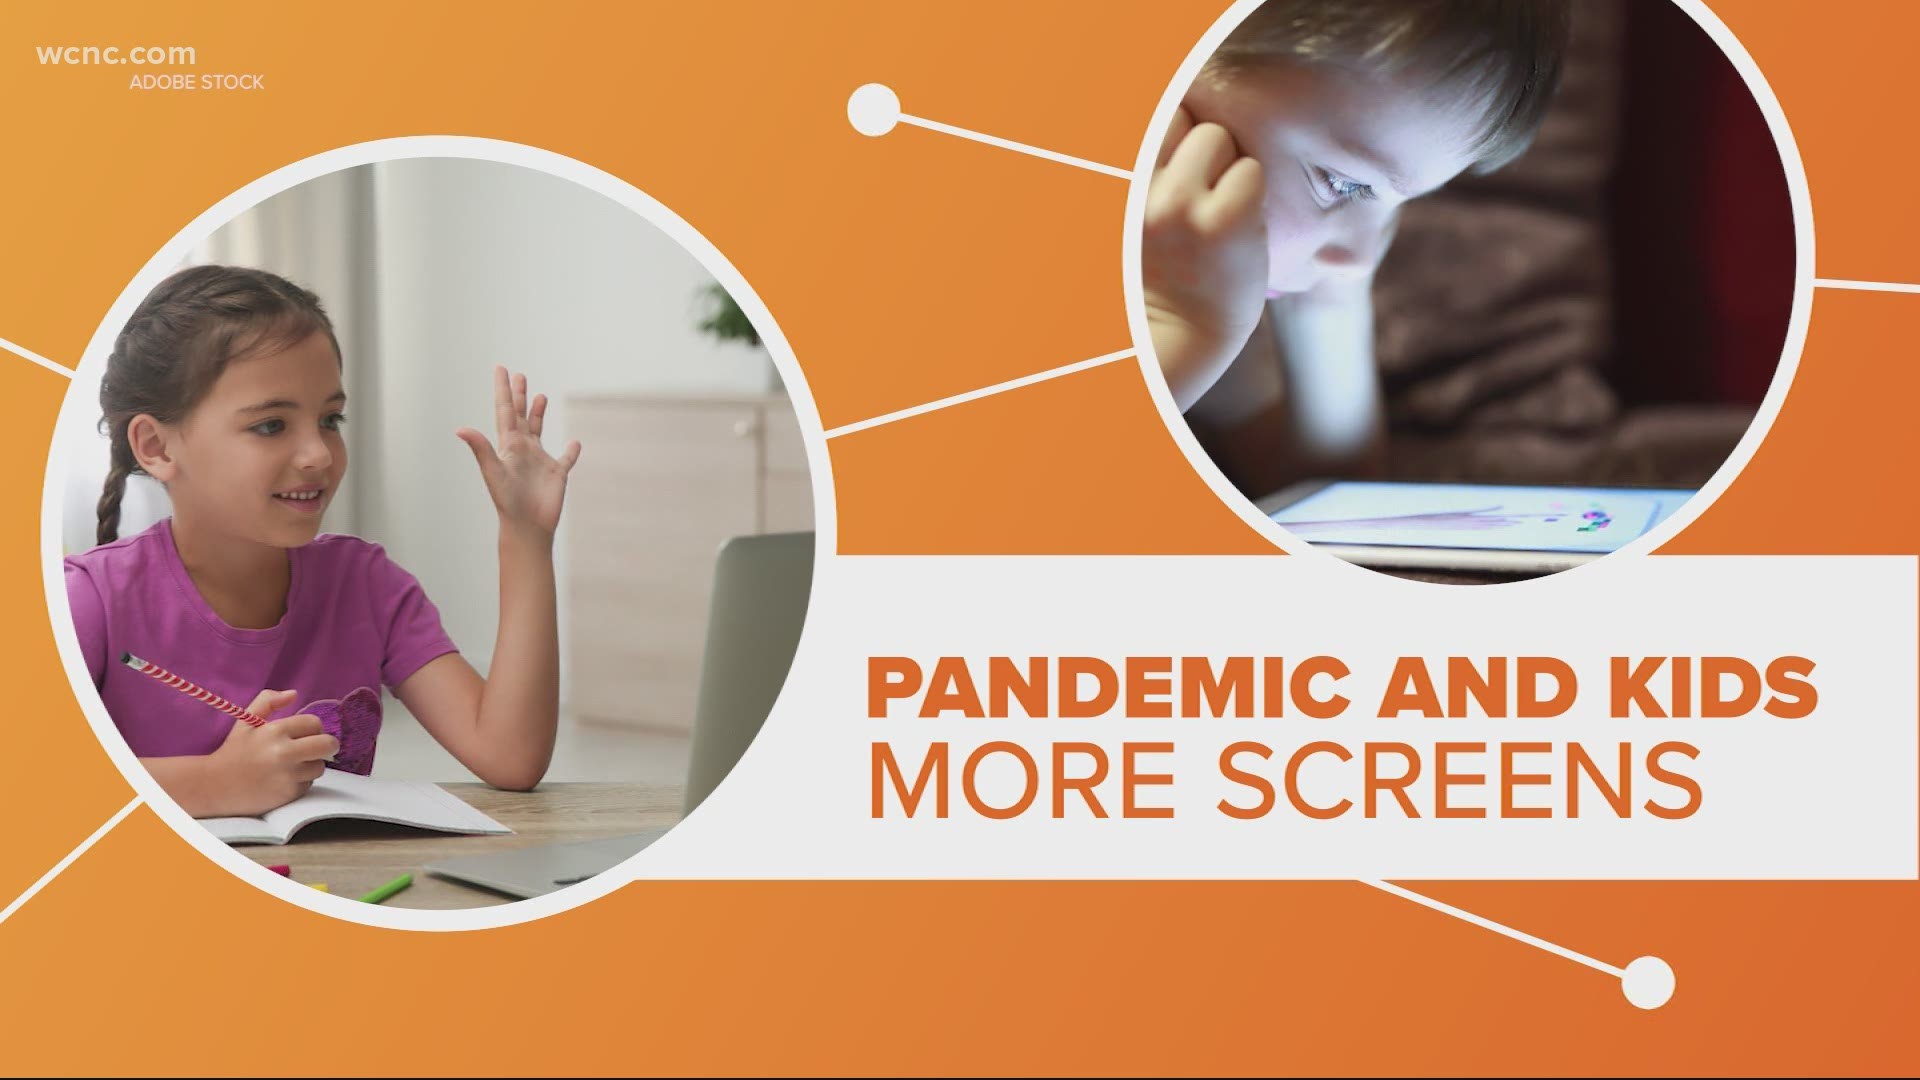 Because of the pandemic, kids are spending more time on devices than ever before. It may sound scary to parents but the good news? It doesn't have to be permanent.